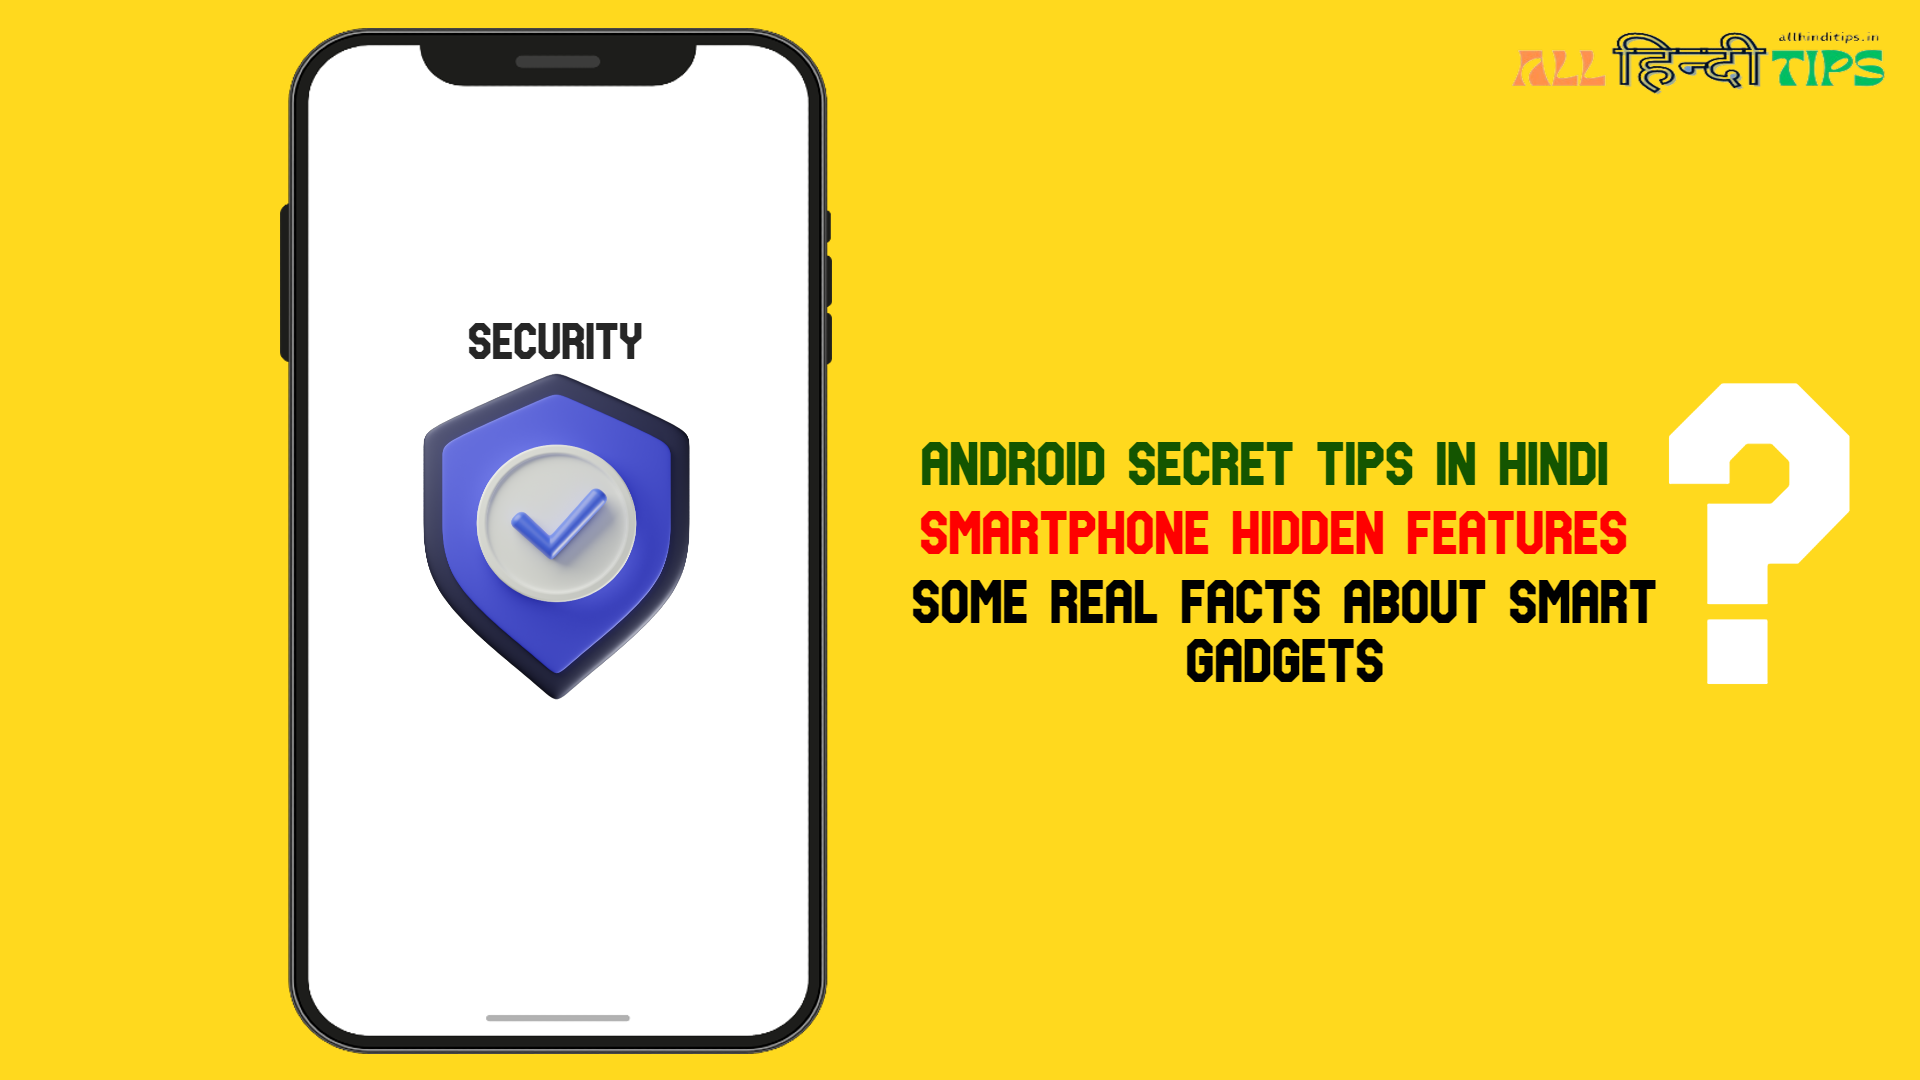 Android secret tips in Hindi